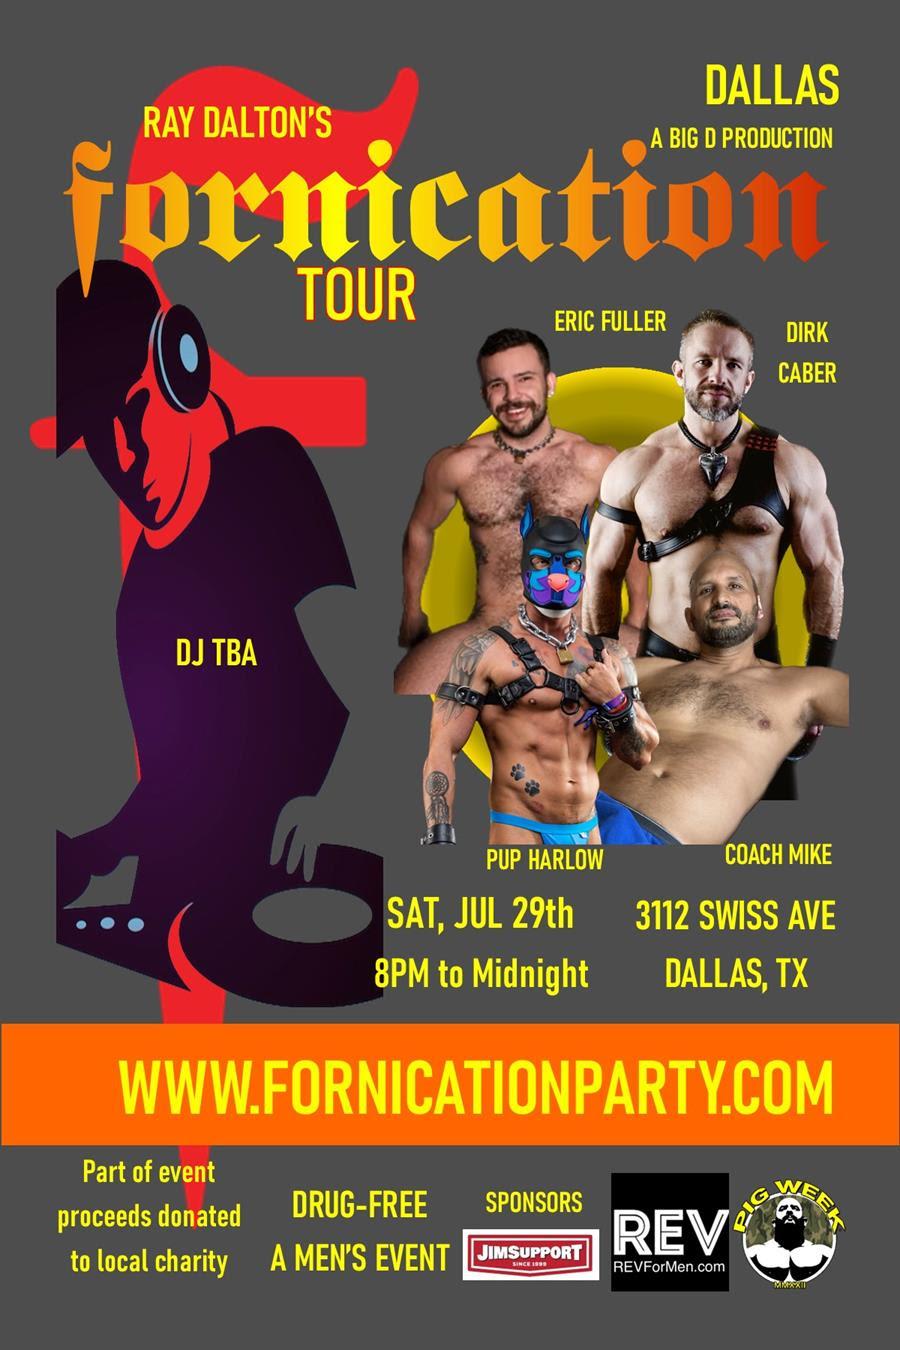 FORNICATION - DALLAS - Event Information - Wicked Gay Parties foto foto